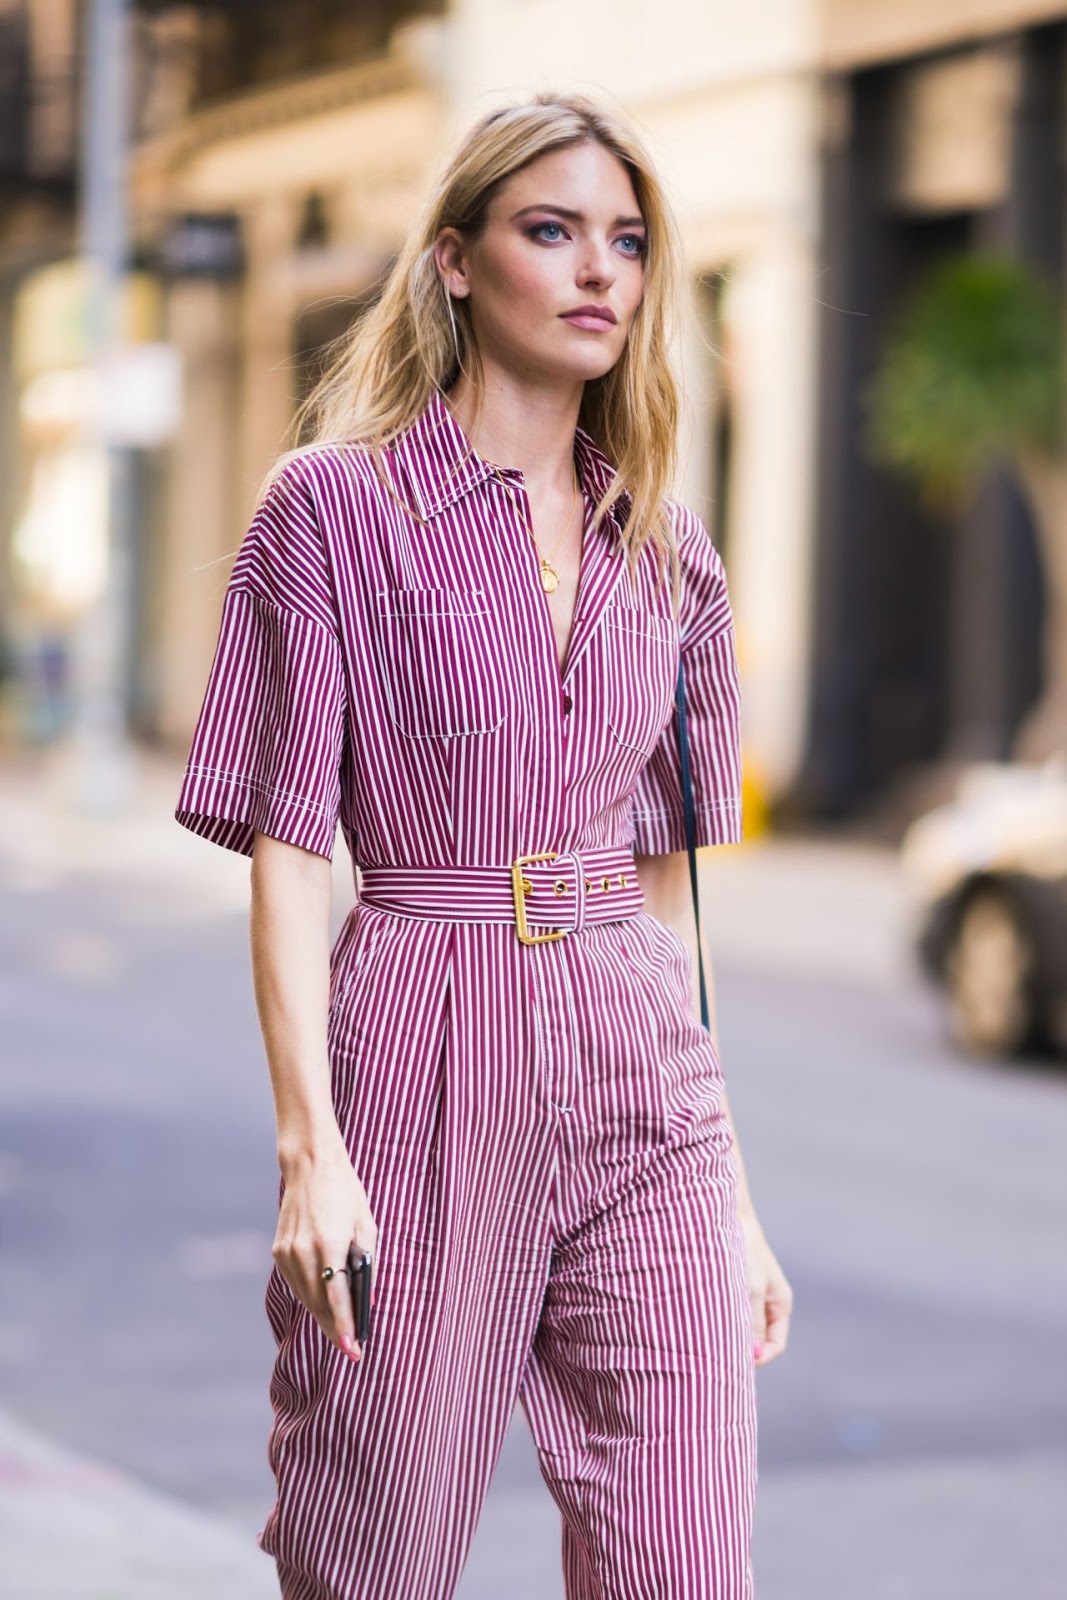 Martha Hunt Style Out in a Striped Jumpsuit Photo